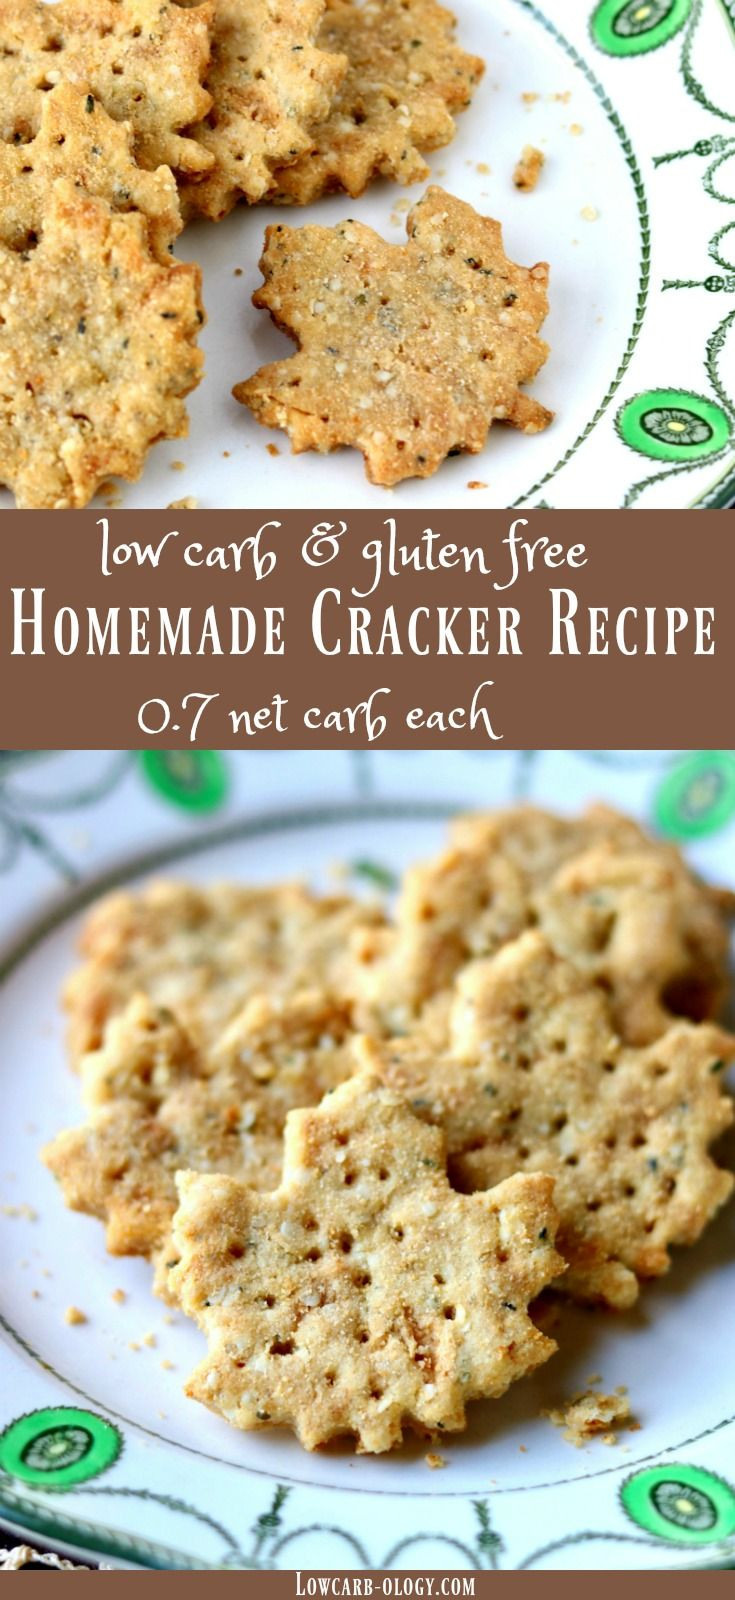 Low Carb Crackers Recipe
 Homemade Cracker Recipe Low Carb Buttery Goodness